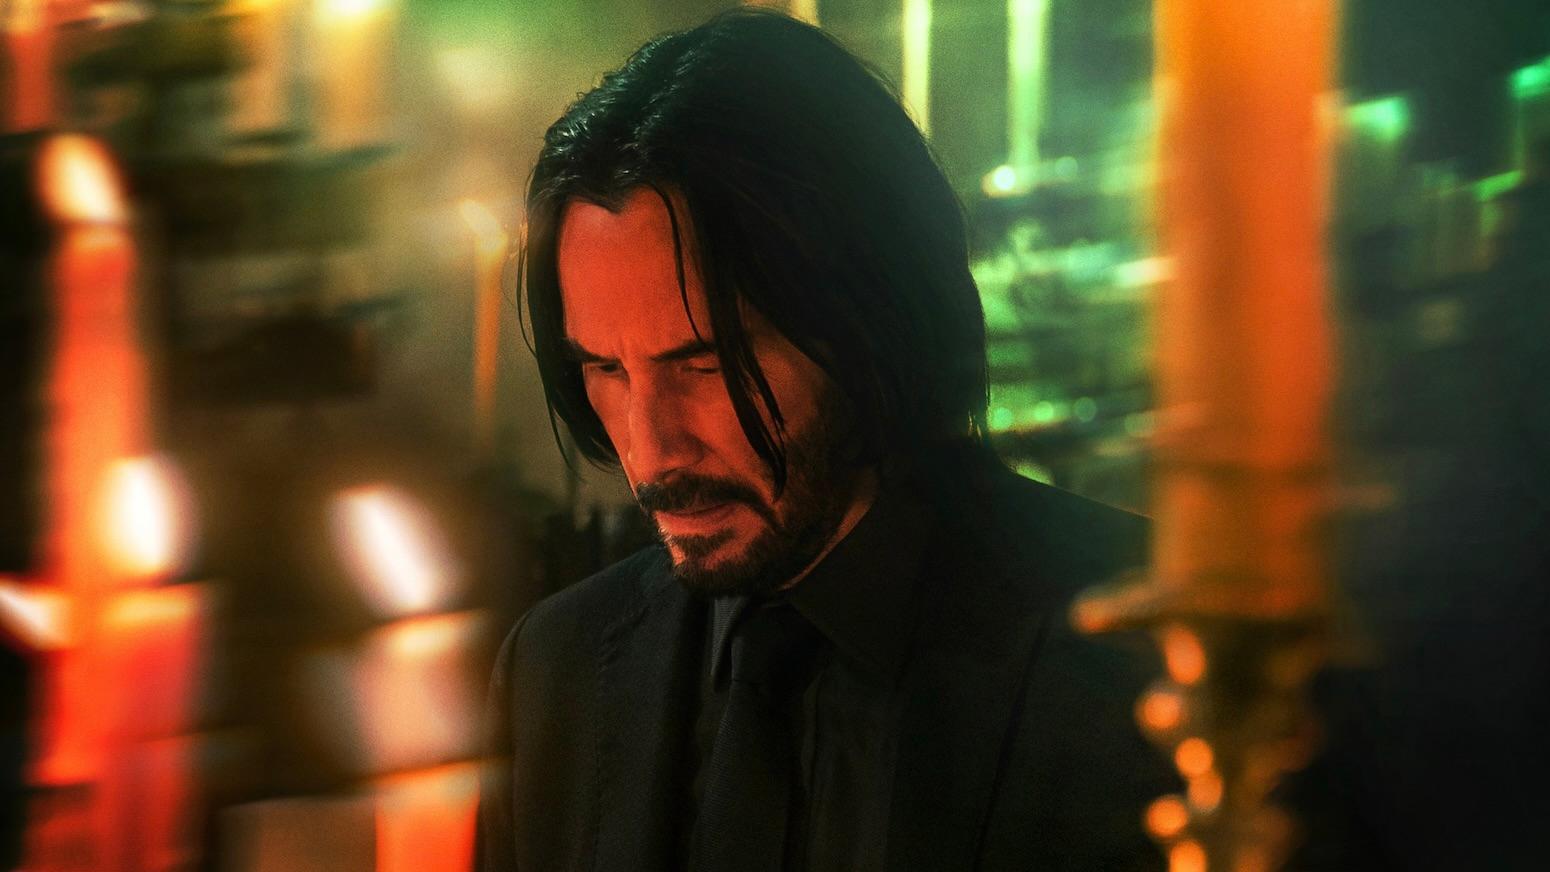 Keanu Reeves in a still from John Wick Chapter 4.